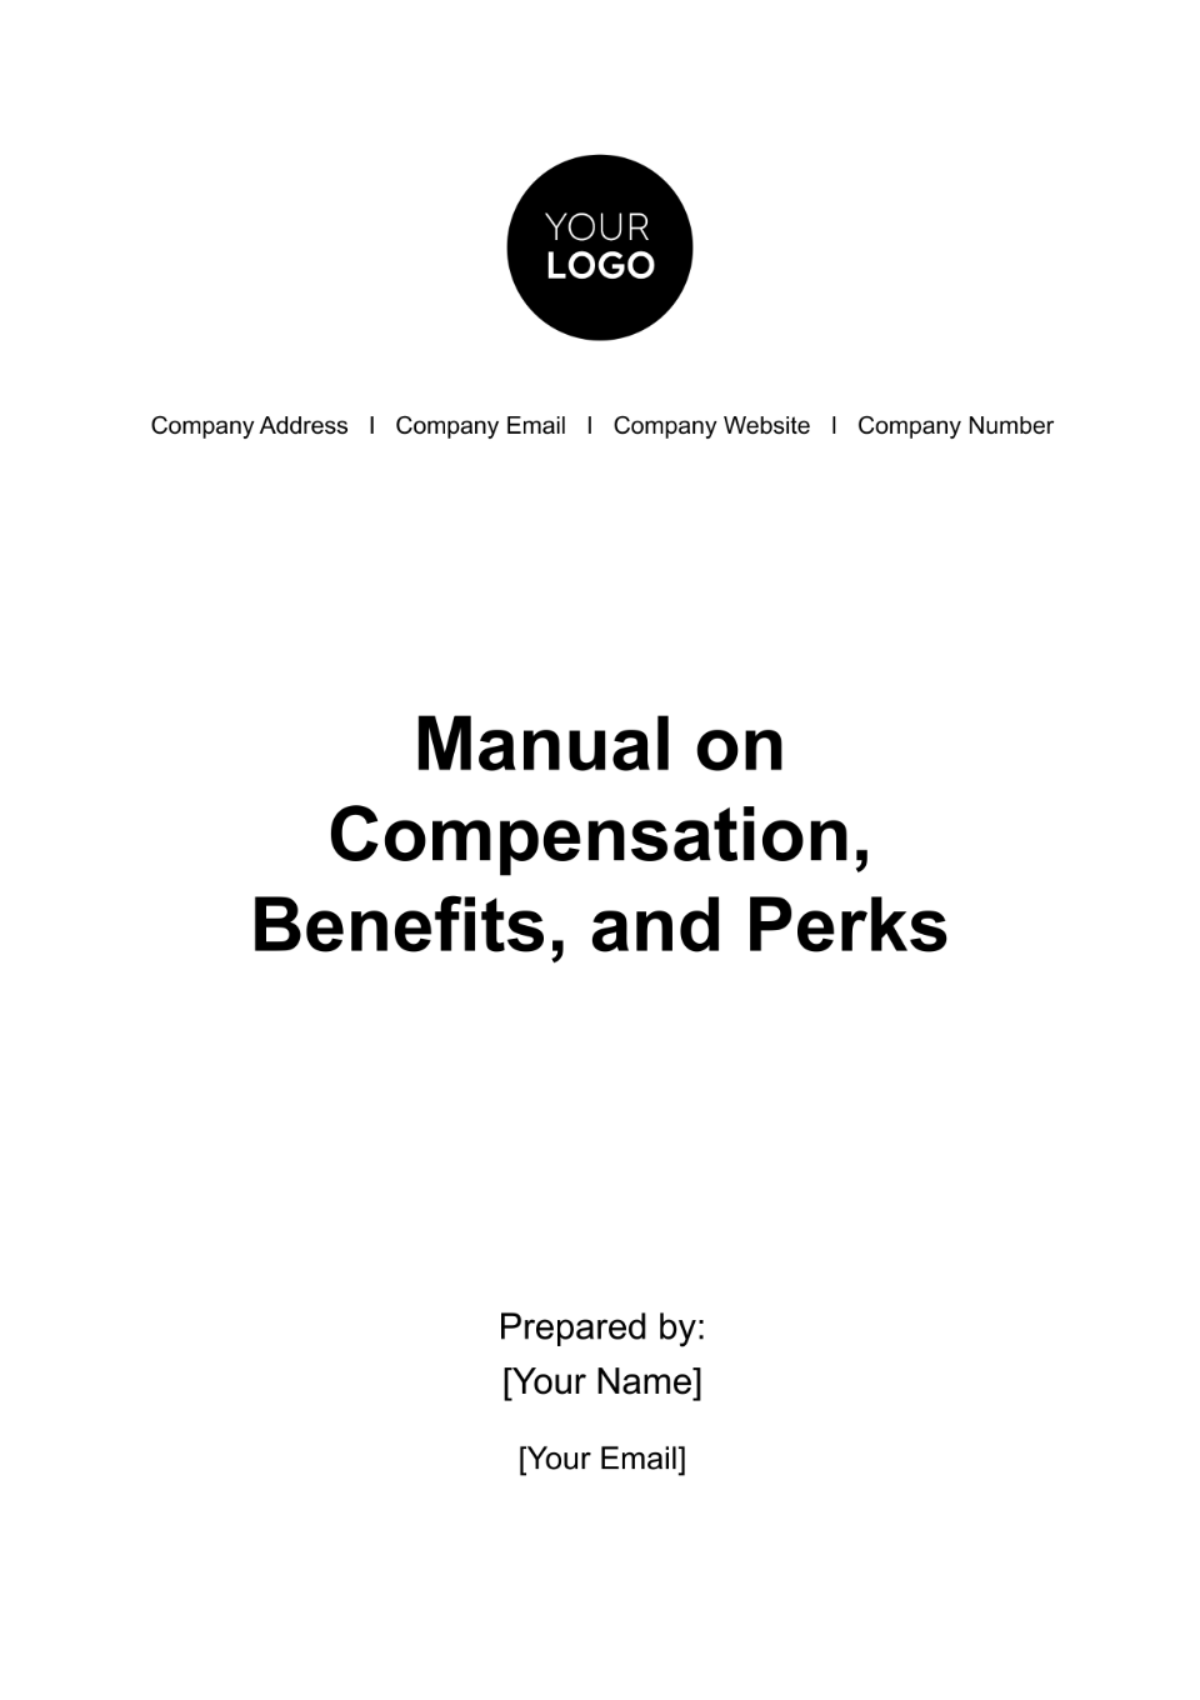 Manual on Compensation, Benefits, and Perks HR Template